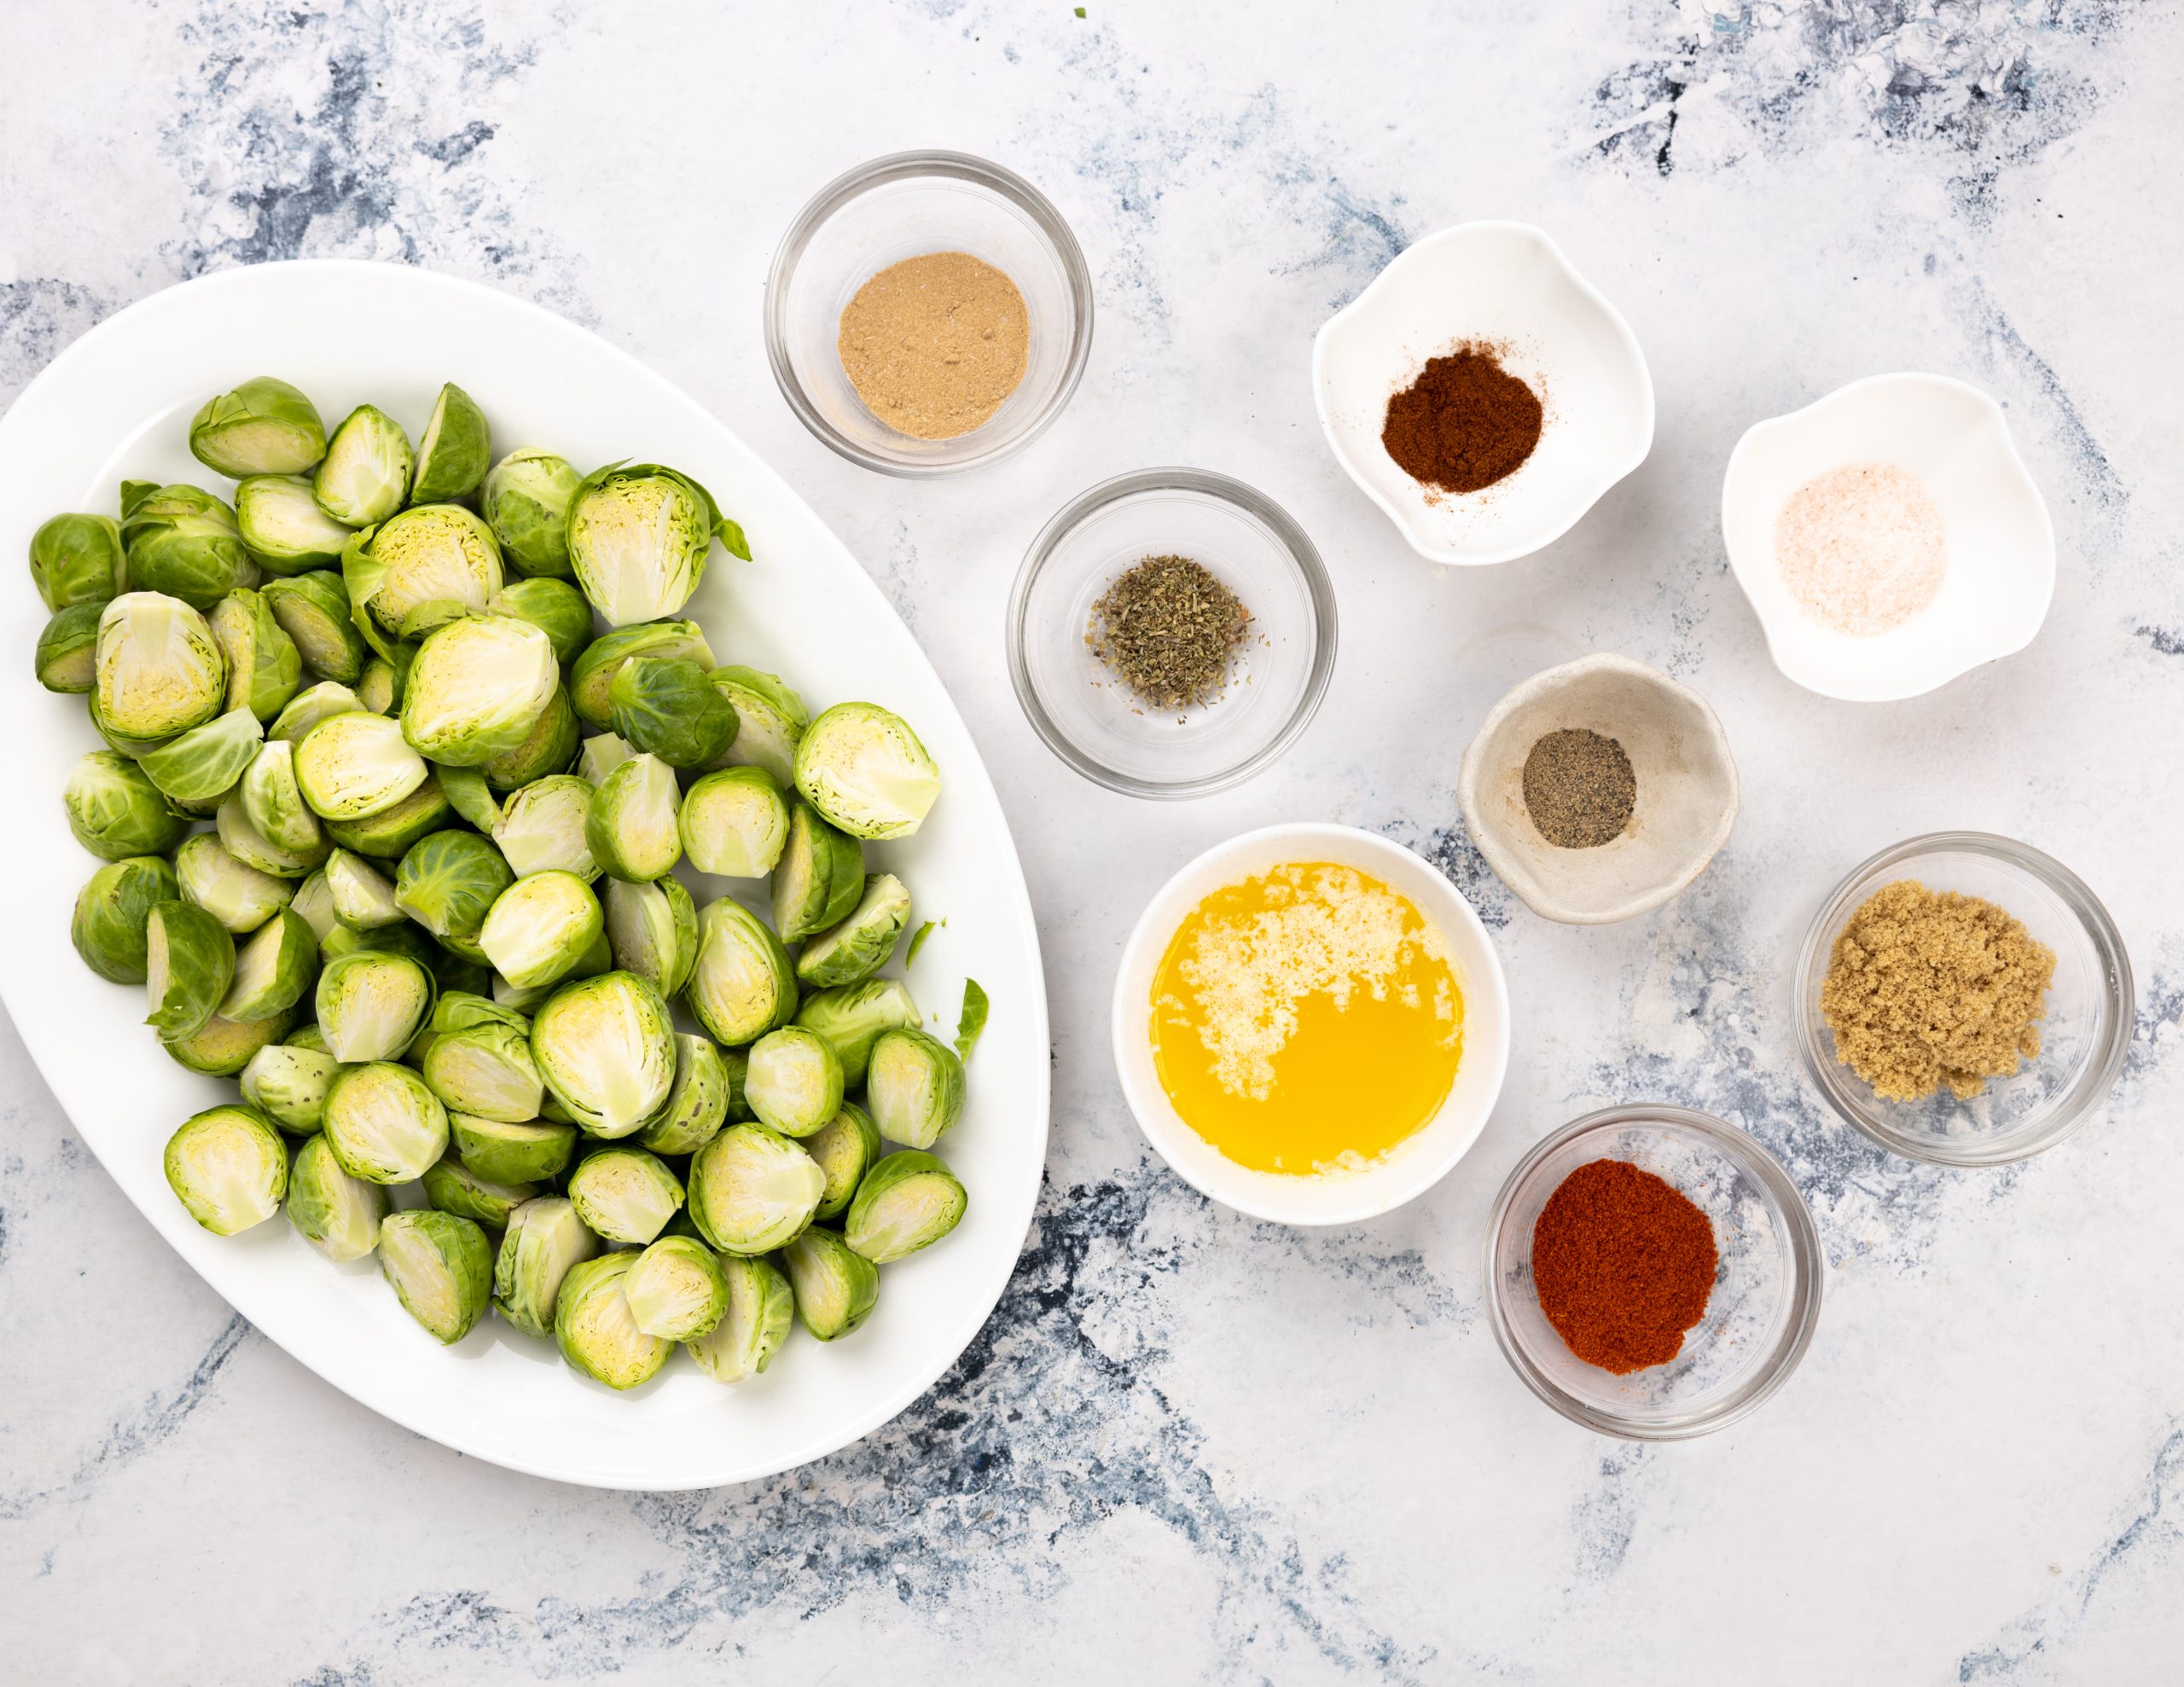 Chopped sprouts, butter, garlic powder, paprika, pepper and Italian seasoning are needed to oven-roast brussel sprouts